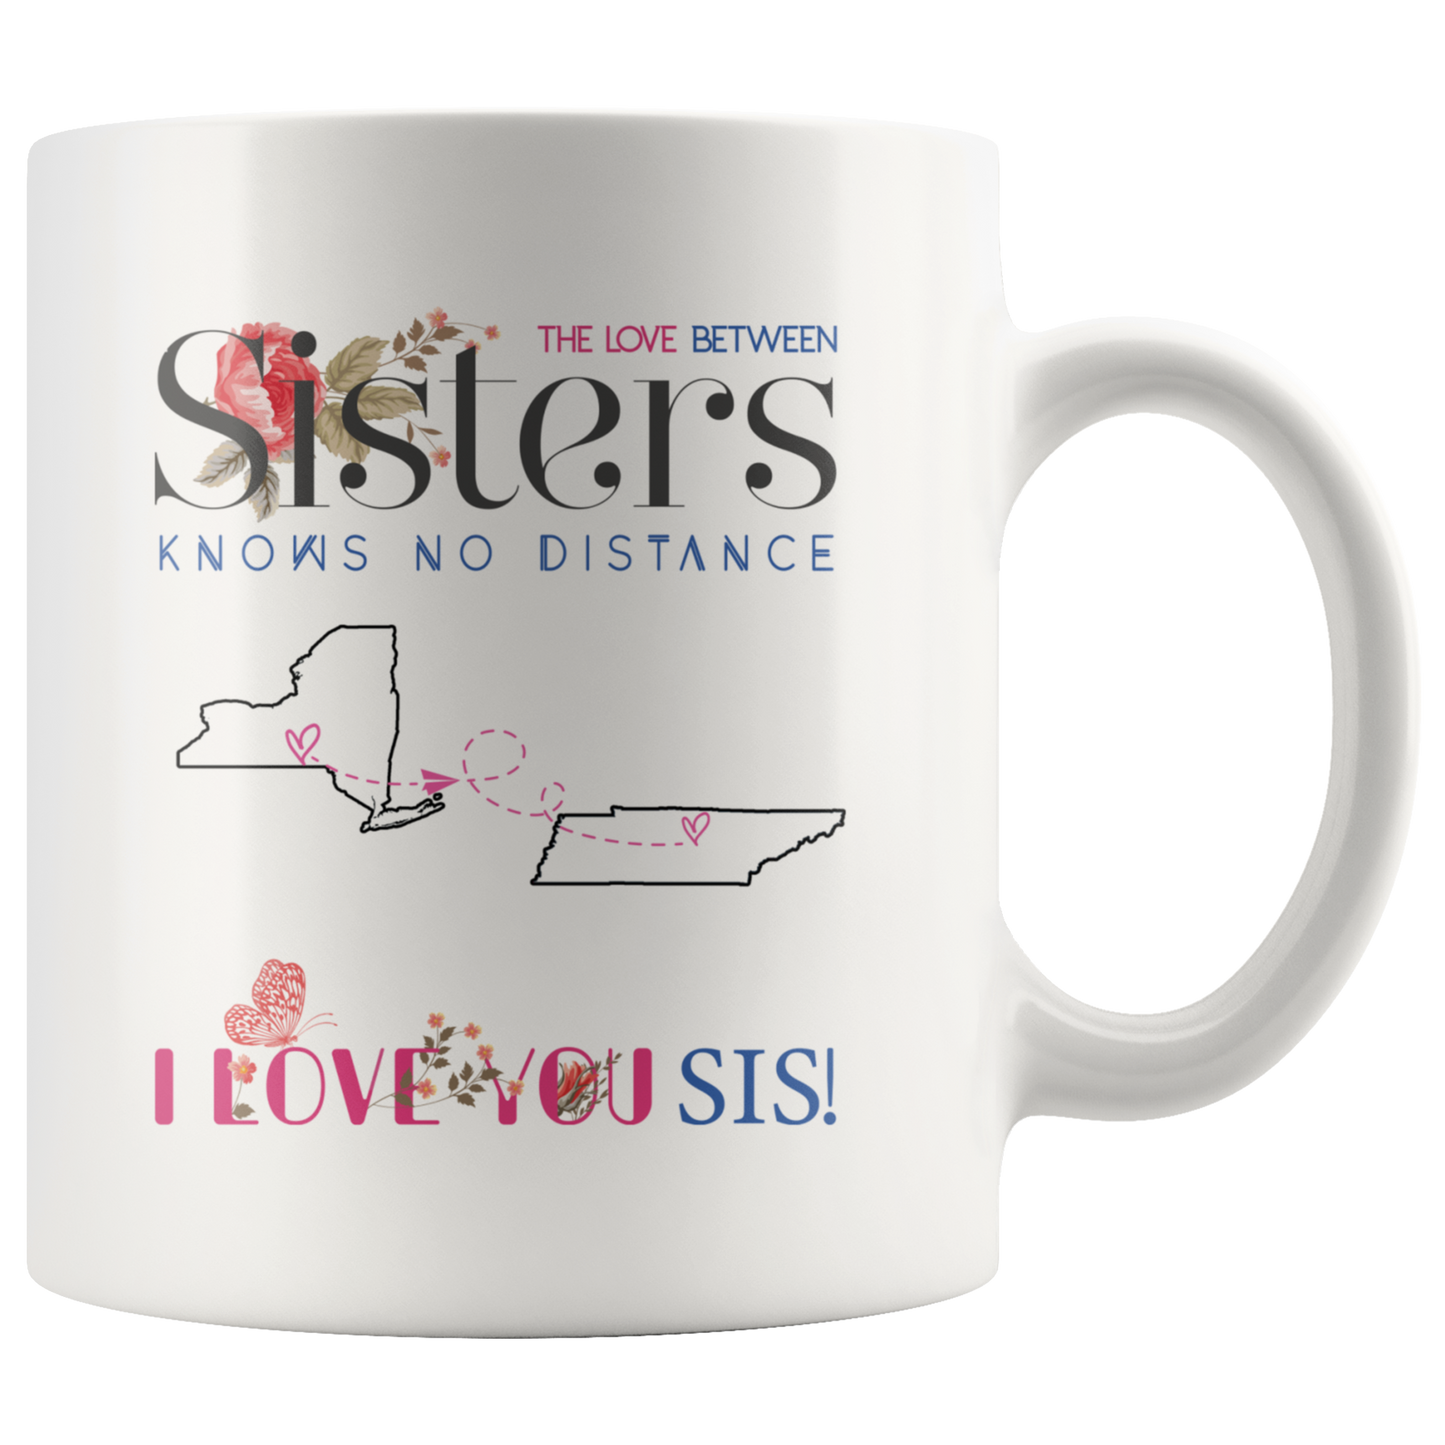 M-20519589-sp-23676 - [ New York | Tennessee ]Long Distance Relationship Gift - The Love Between Sisters K